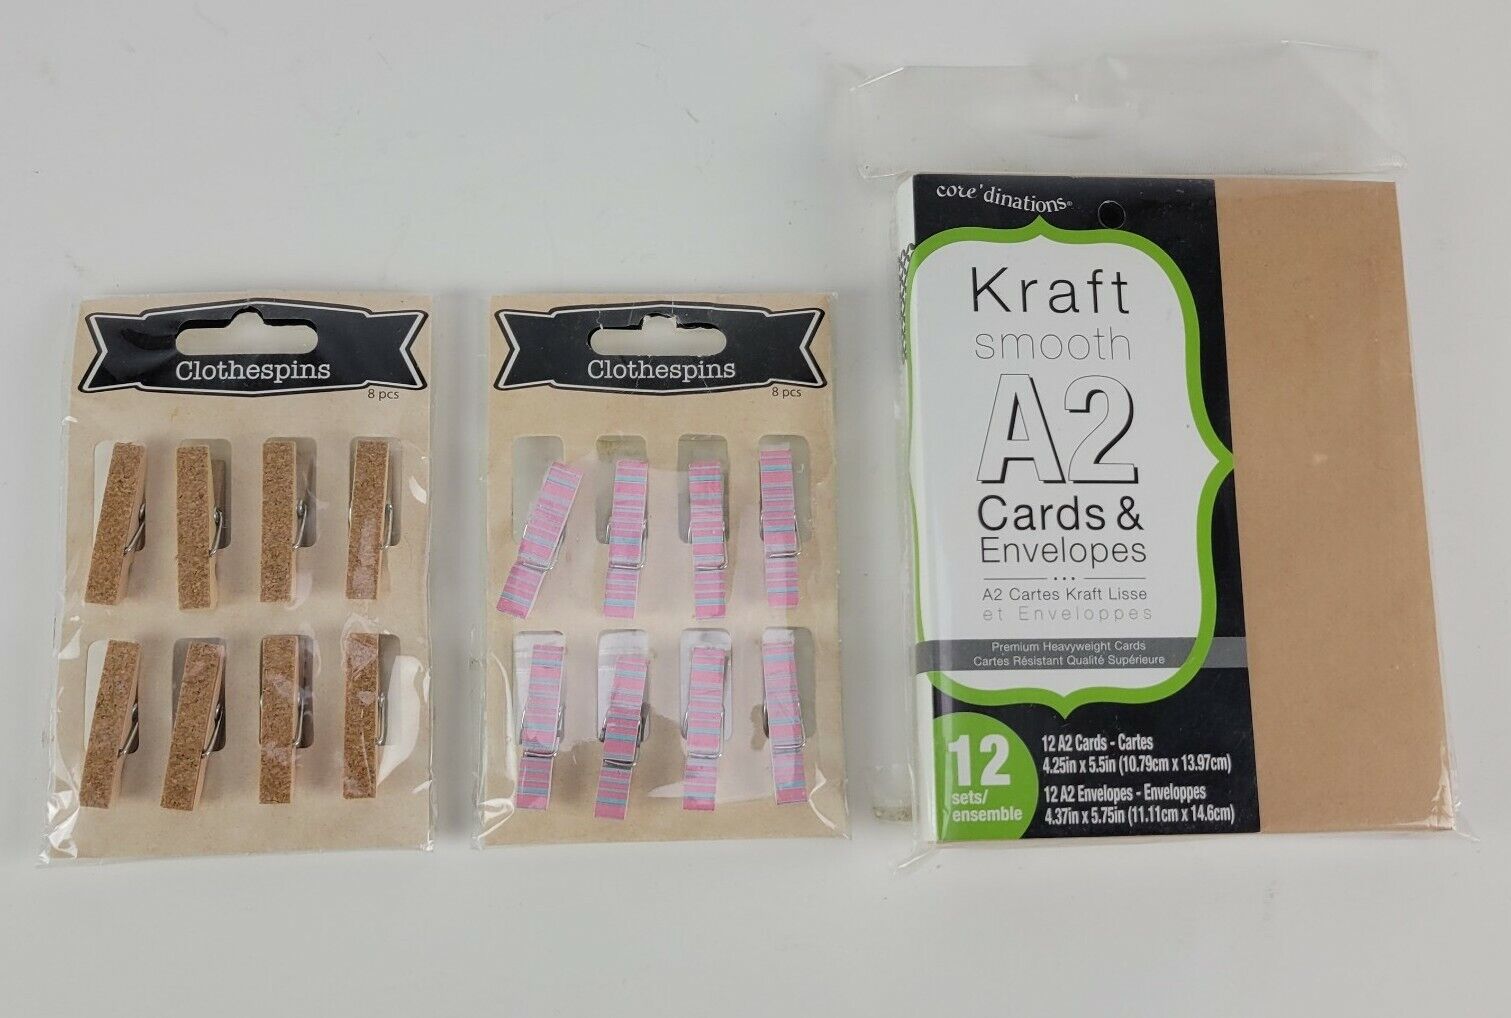 Lot Of 3 Crafts Decorative Mini Clothespins & A2 Cards Crafting Set